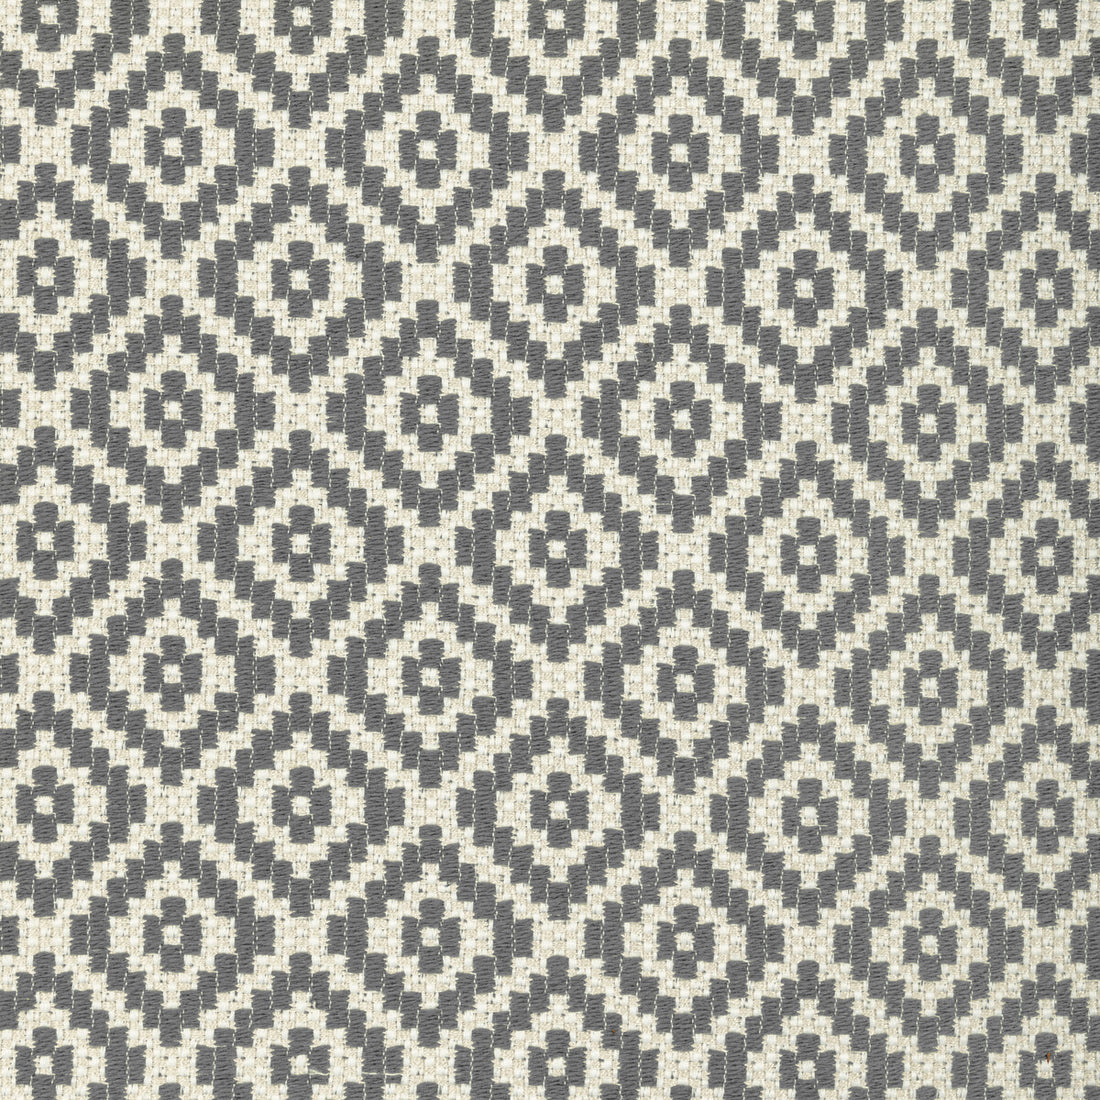 Kravet Design fabric in 36411-21 color - pattern 36411.21.0 - by Kravet Design in the Performance Crypton Home collection